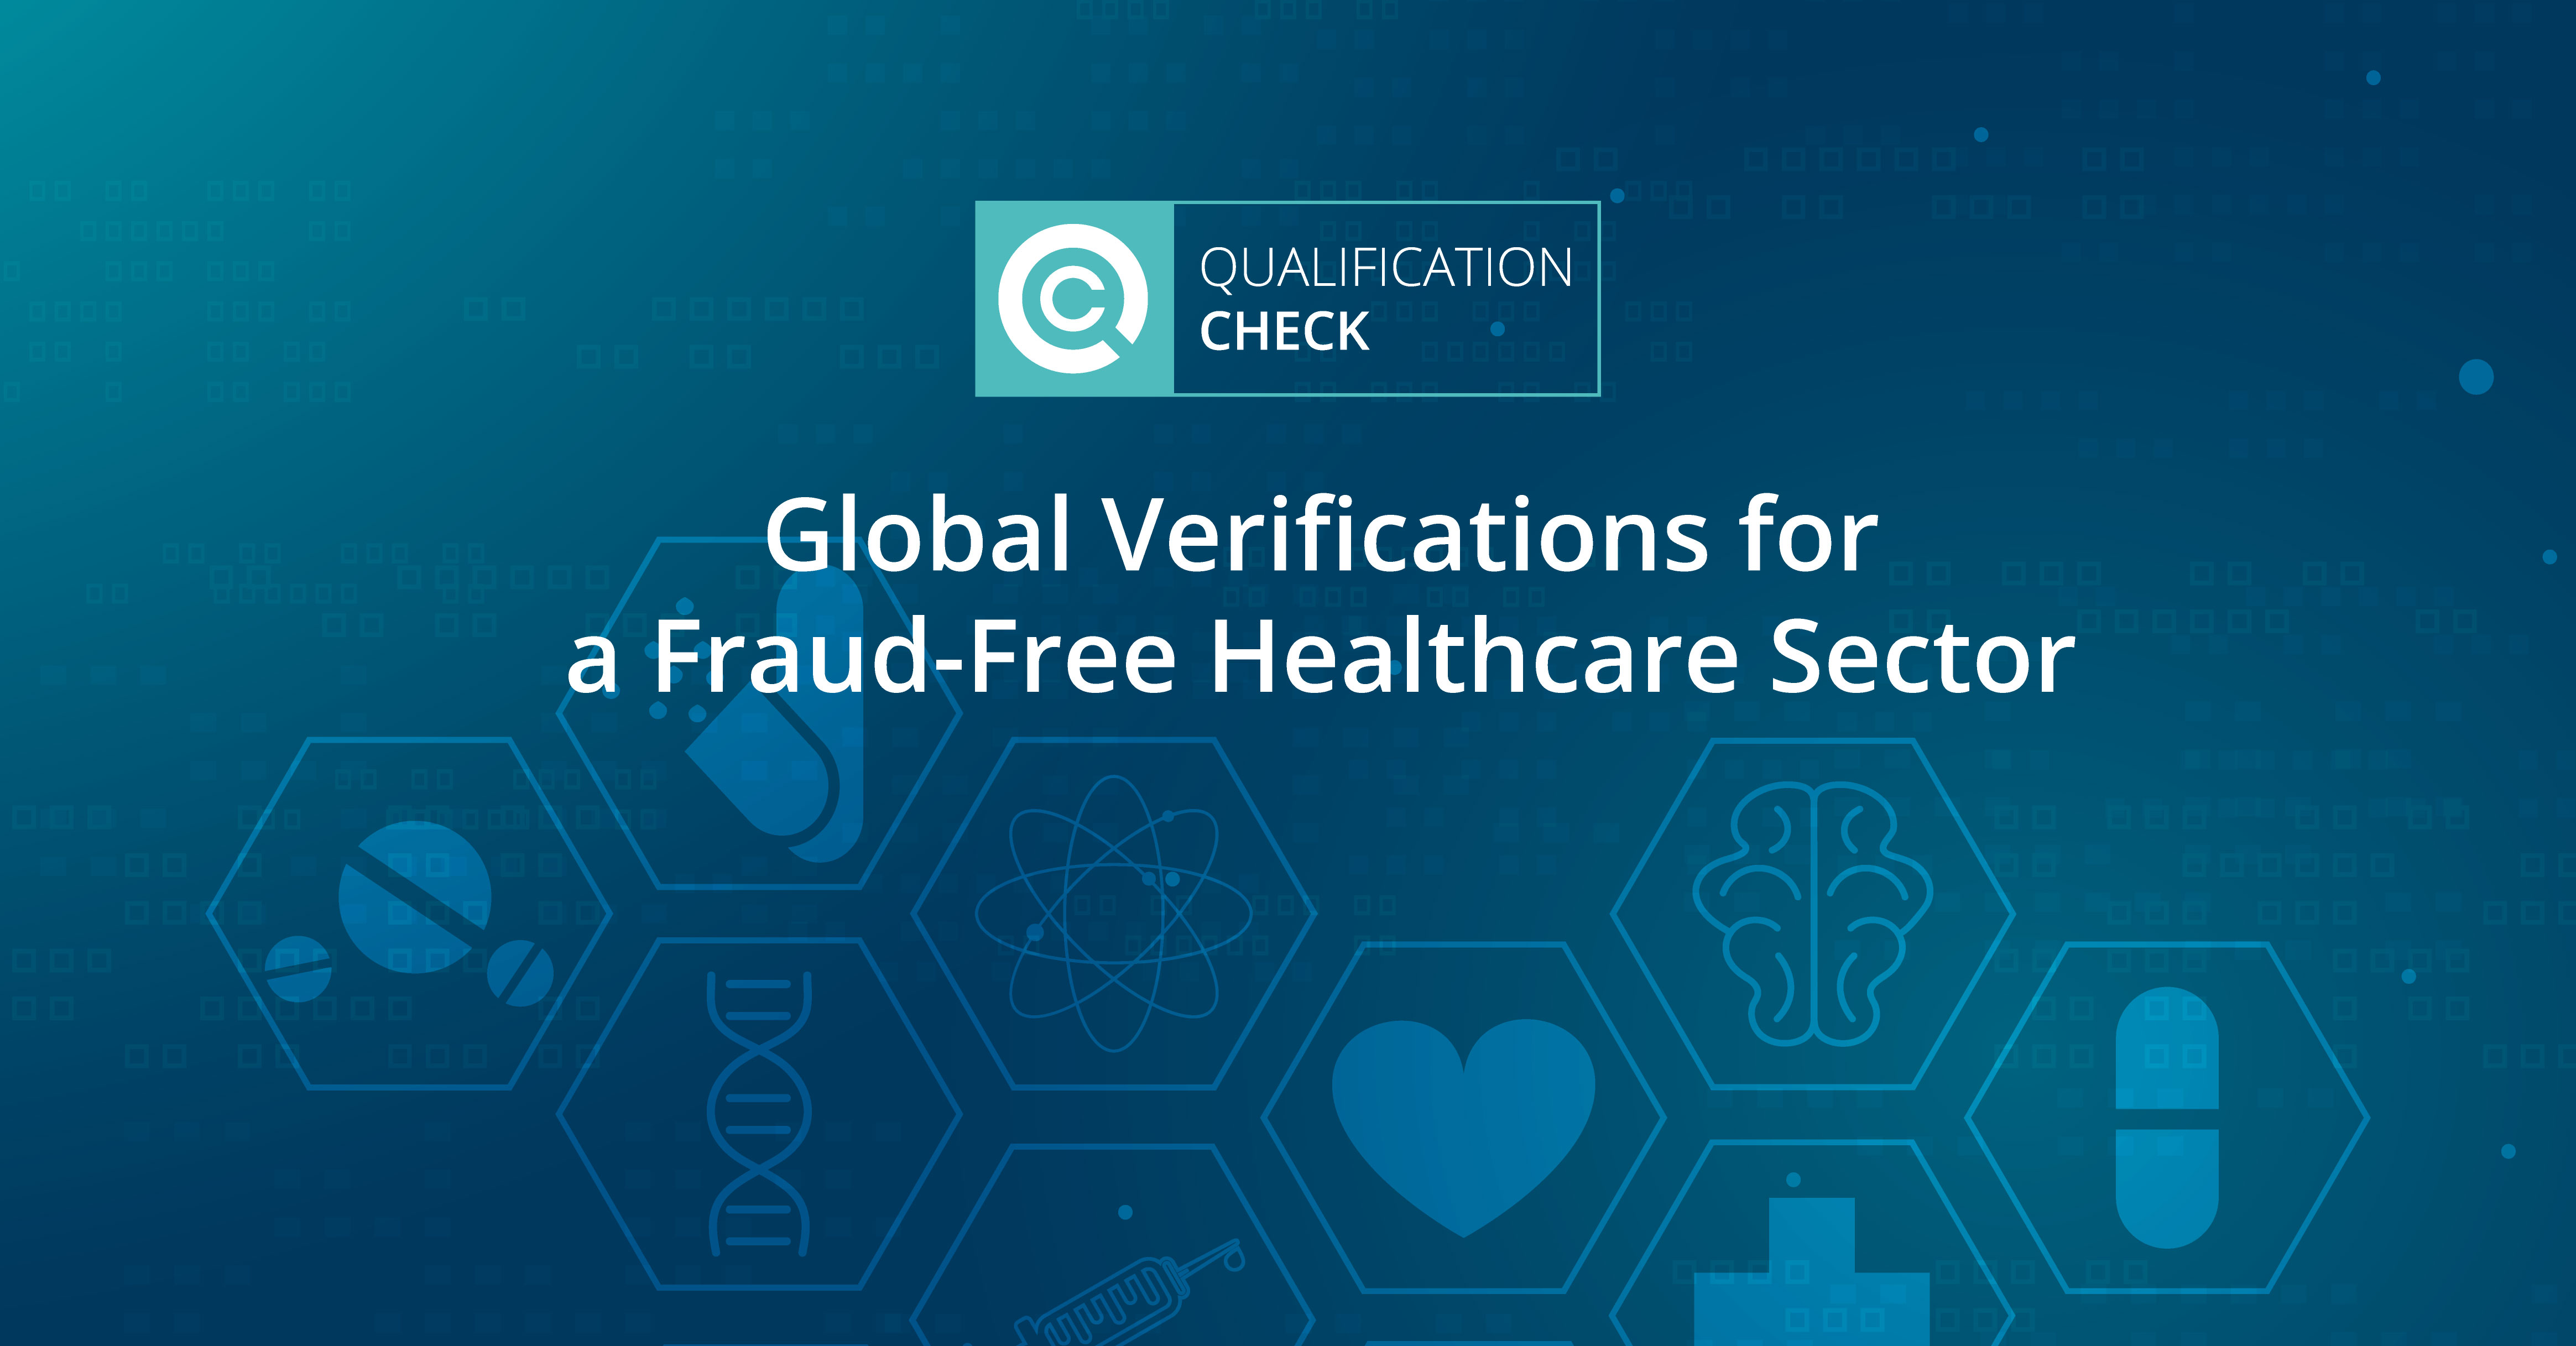 Global Verifications for a Fraud-Free Healthcare Sector